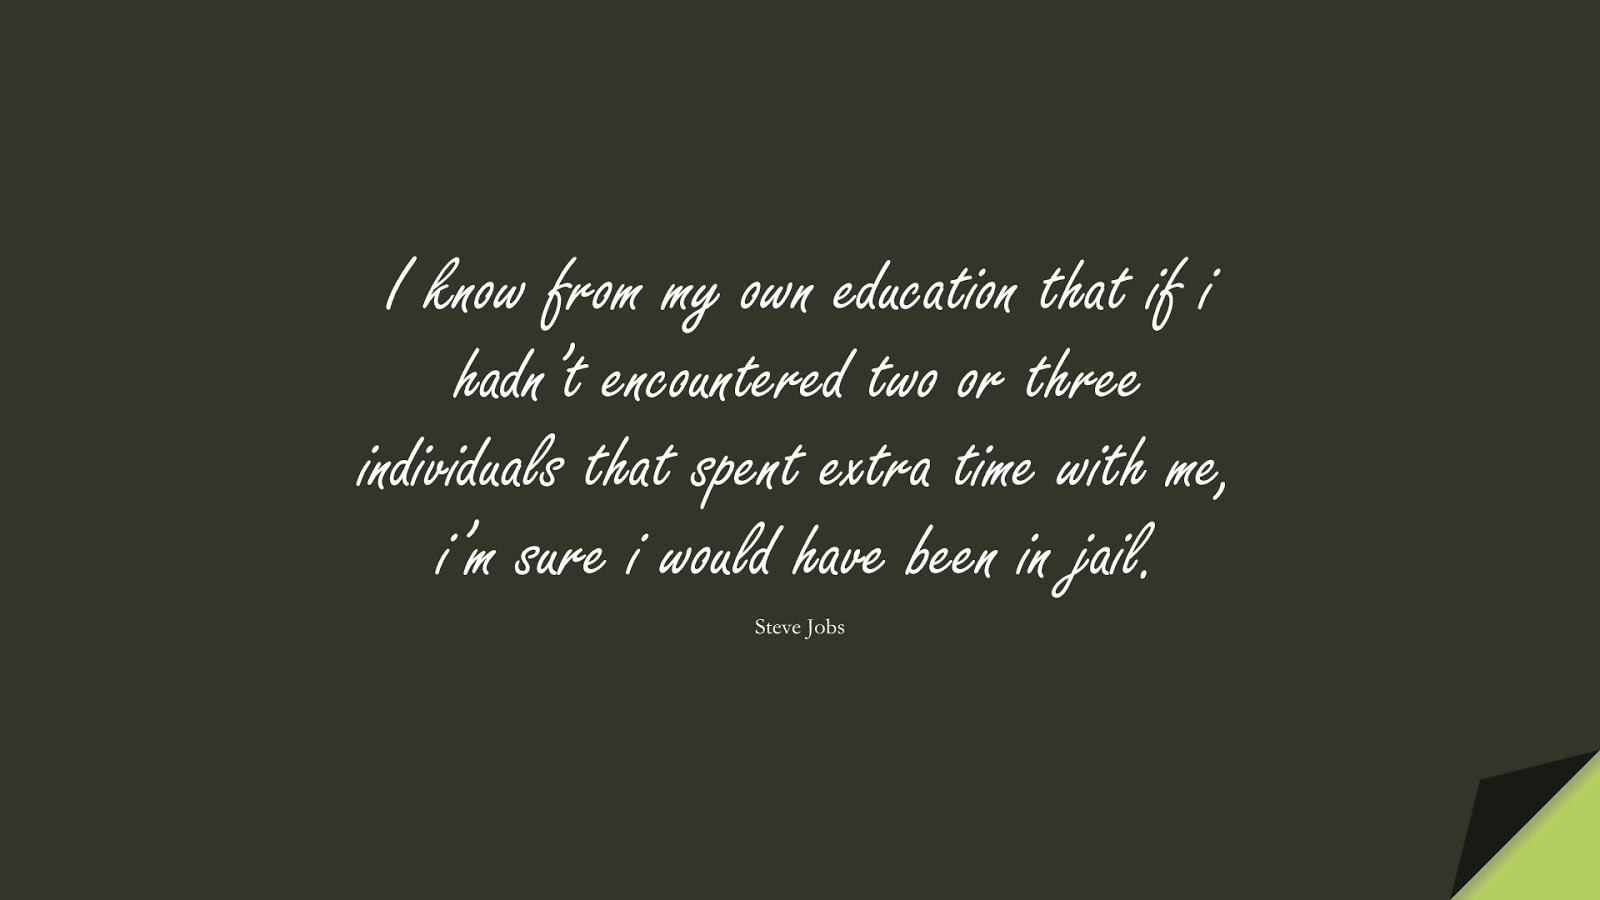 I know from my own education that if i hadn’t encountered two or three individuals that spent extra time with me, i’m sure i would have been in jail. (Steve Jobs);  #SteveJobsQuotes